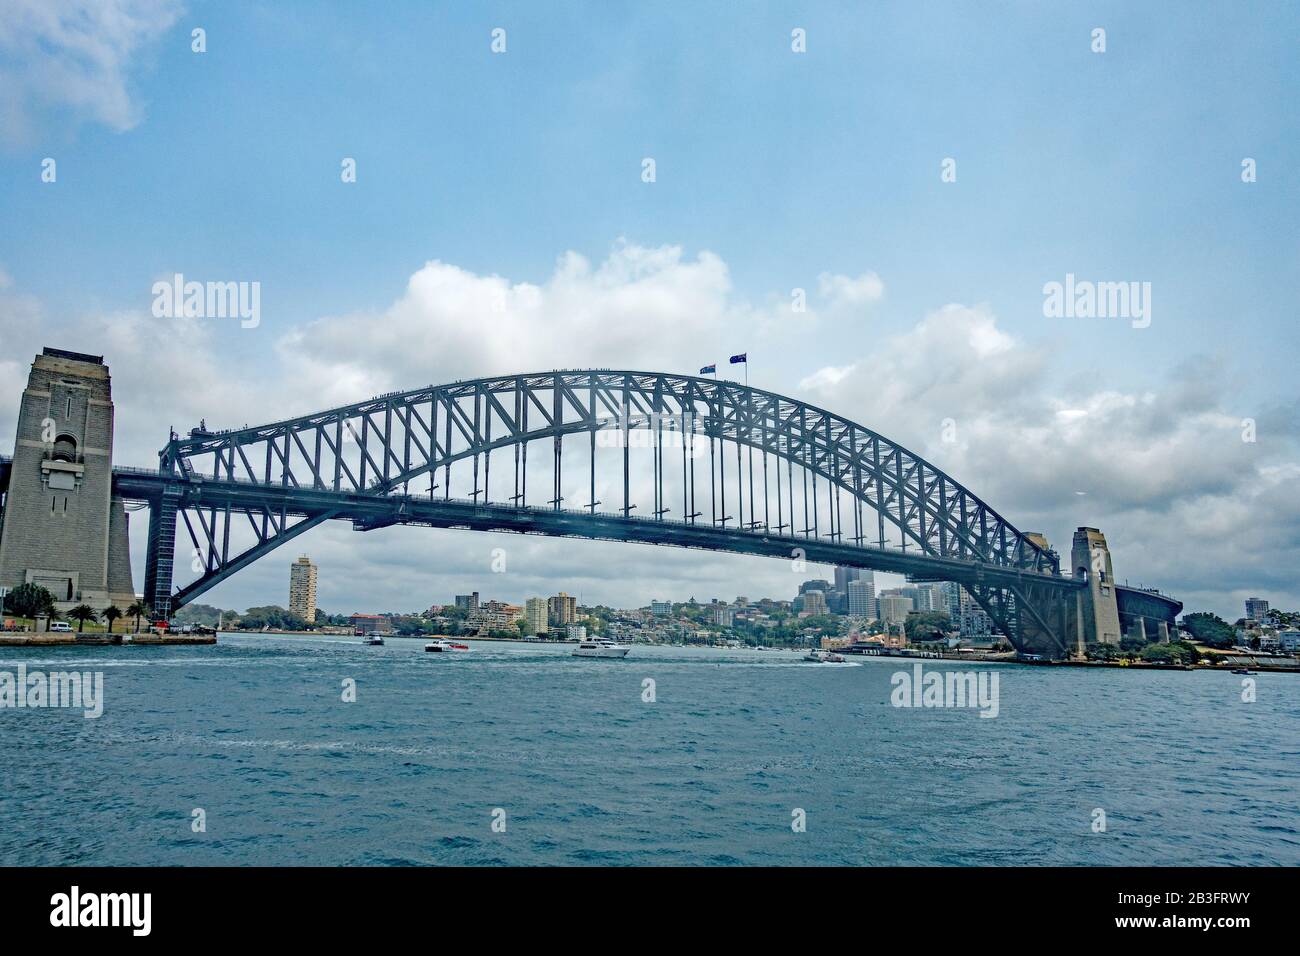 Sydney Harbour Bridge viewed from the water with people walking over the arch. Stock Photo